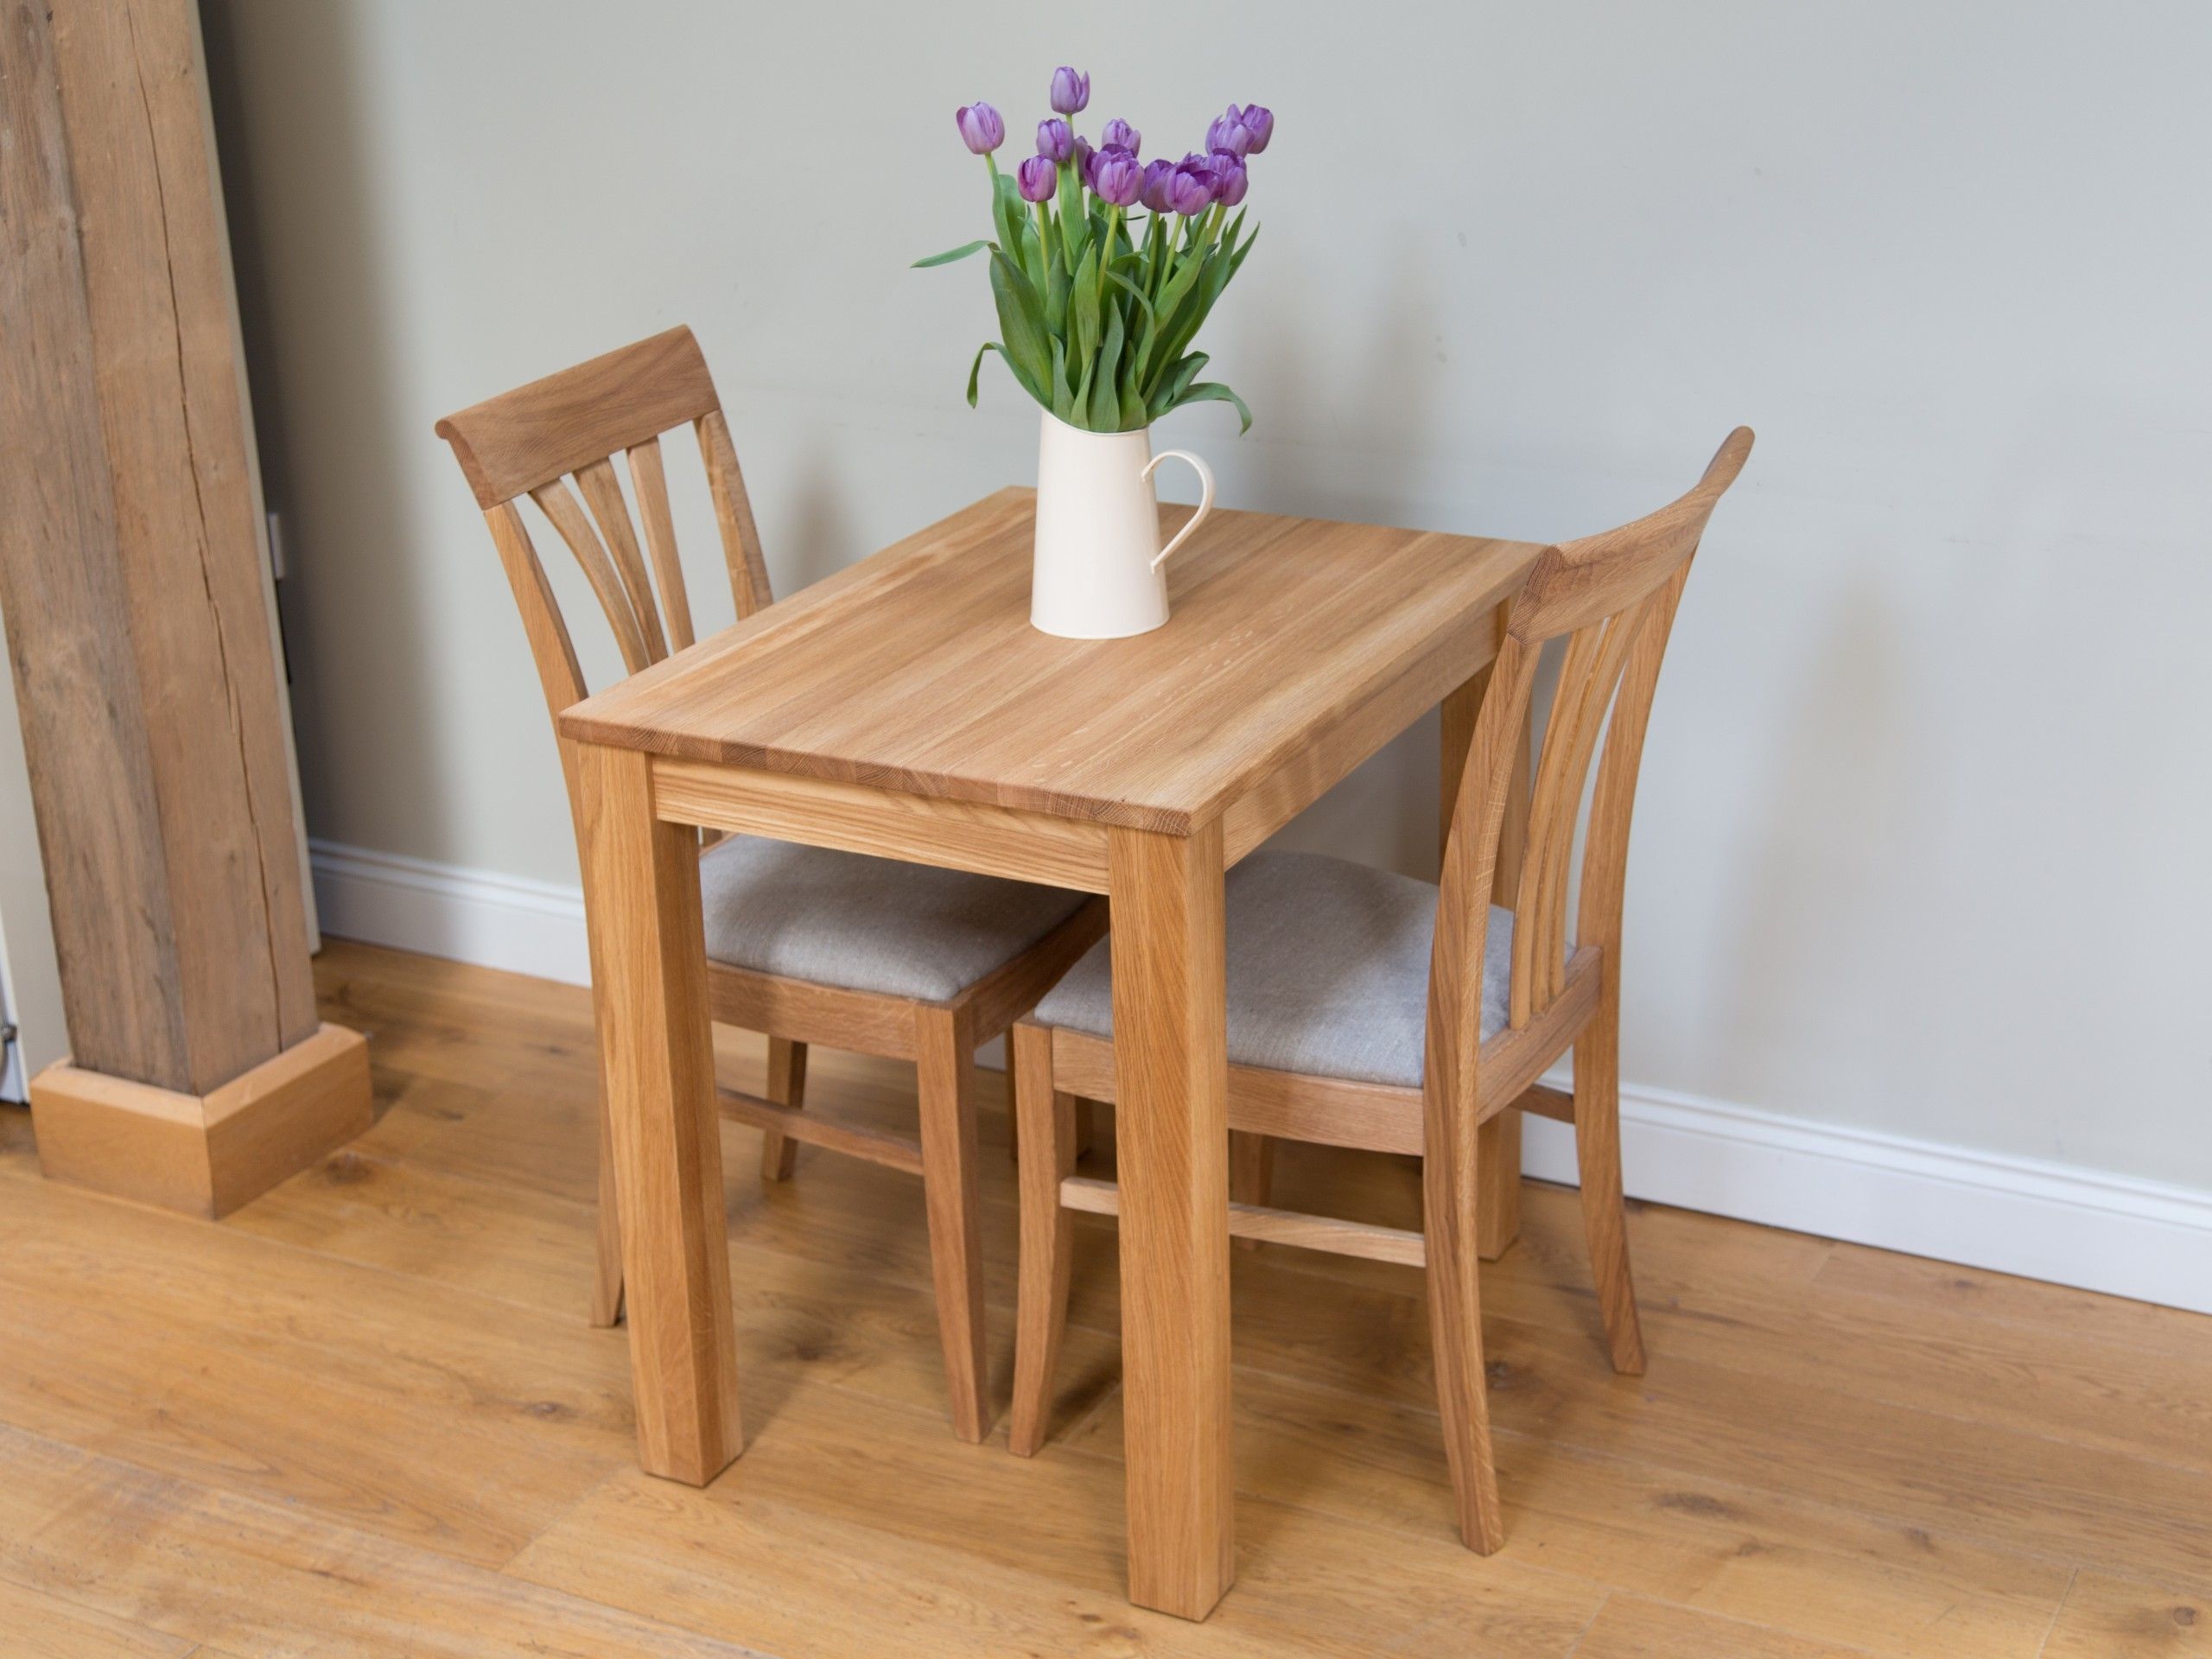 Oak Kitchen Table Chair Dining Set From Top Furniture, At A Table Inside Trendy Dining Tables And Chairs For Two (Photo 6 of 25)